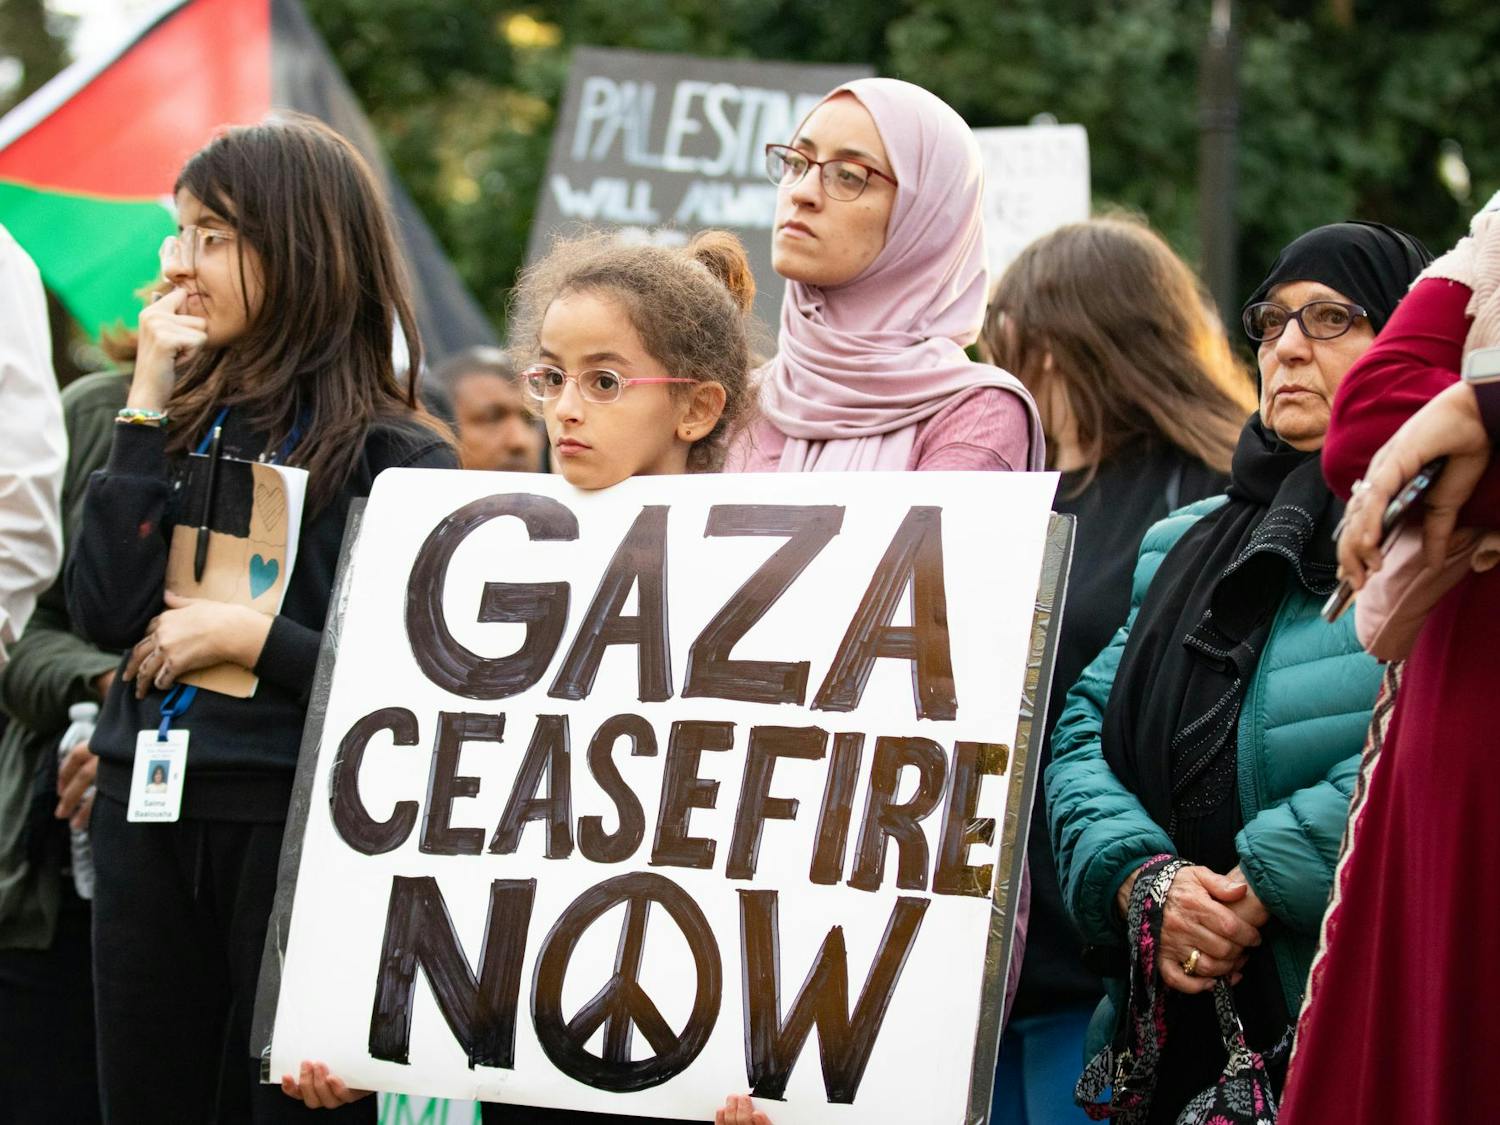 A child at the Free Palestine rally holds a sign reading "Gaza ceasefire now" as she watches speakers at the protest. Members of the North and South Carolina Party for Social Liberation organized the rally held on Statehouse grounds in Columbia, S.C., on Oct. 17, 2023.